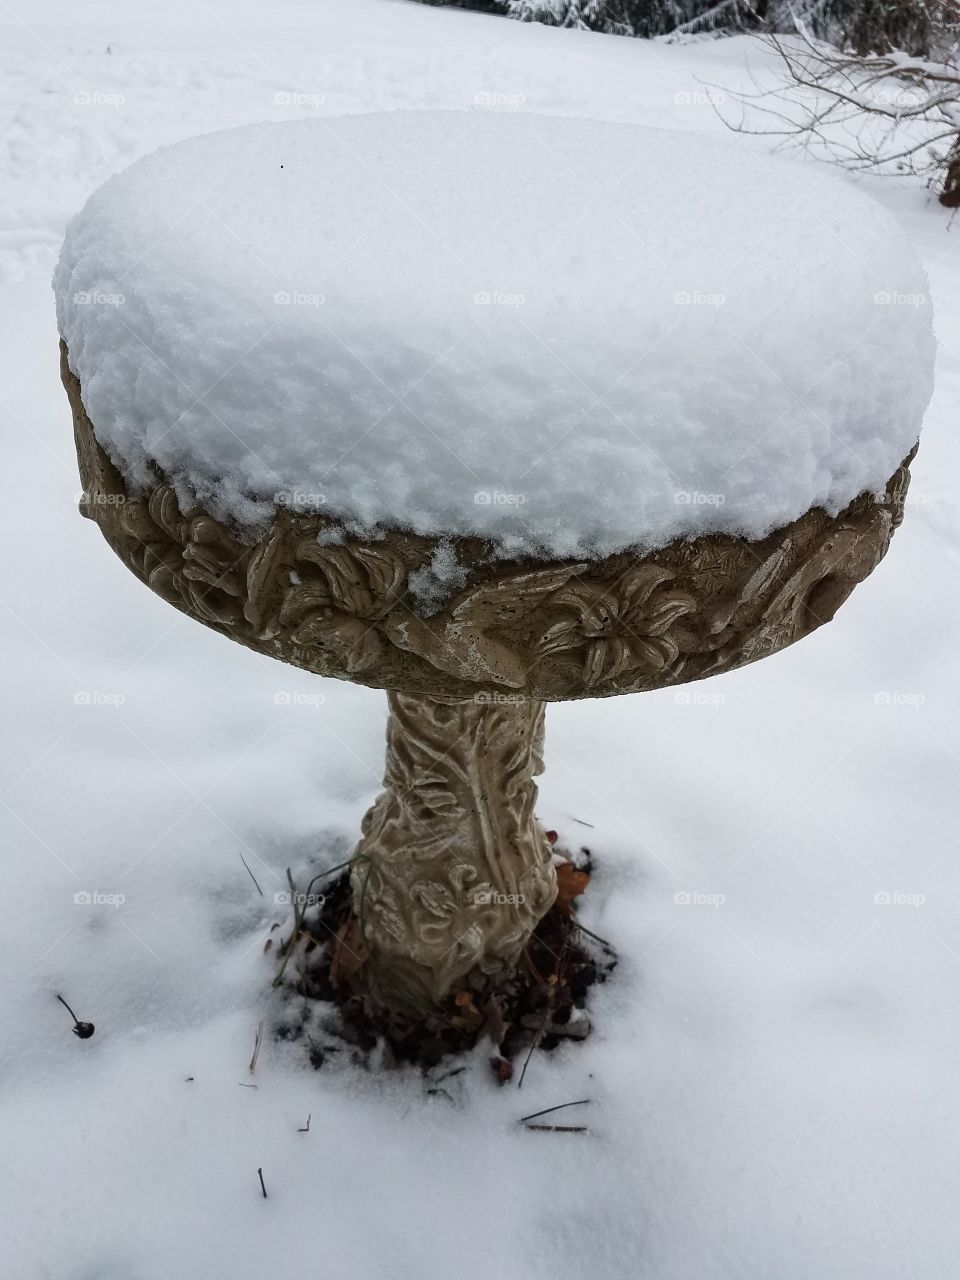 Snow covered object